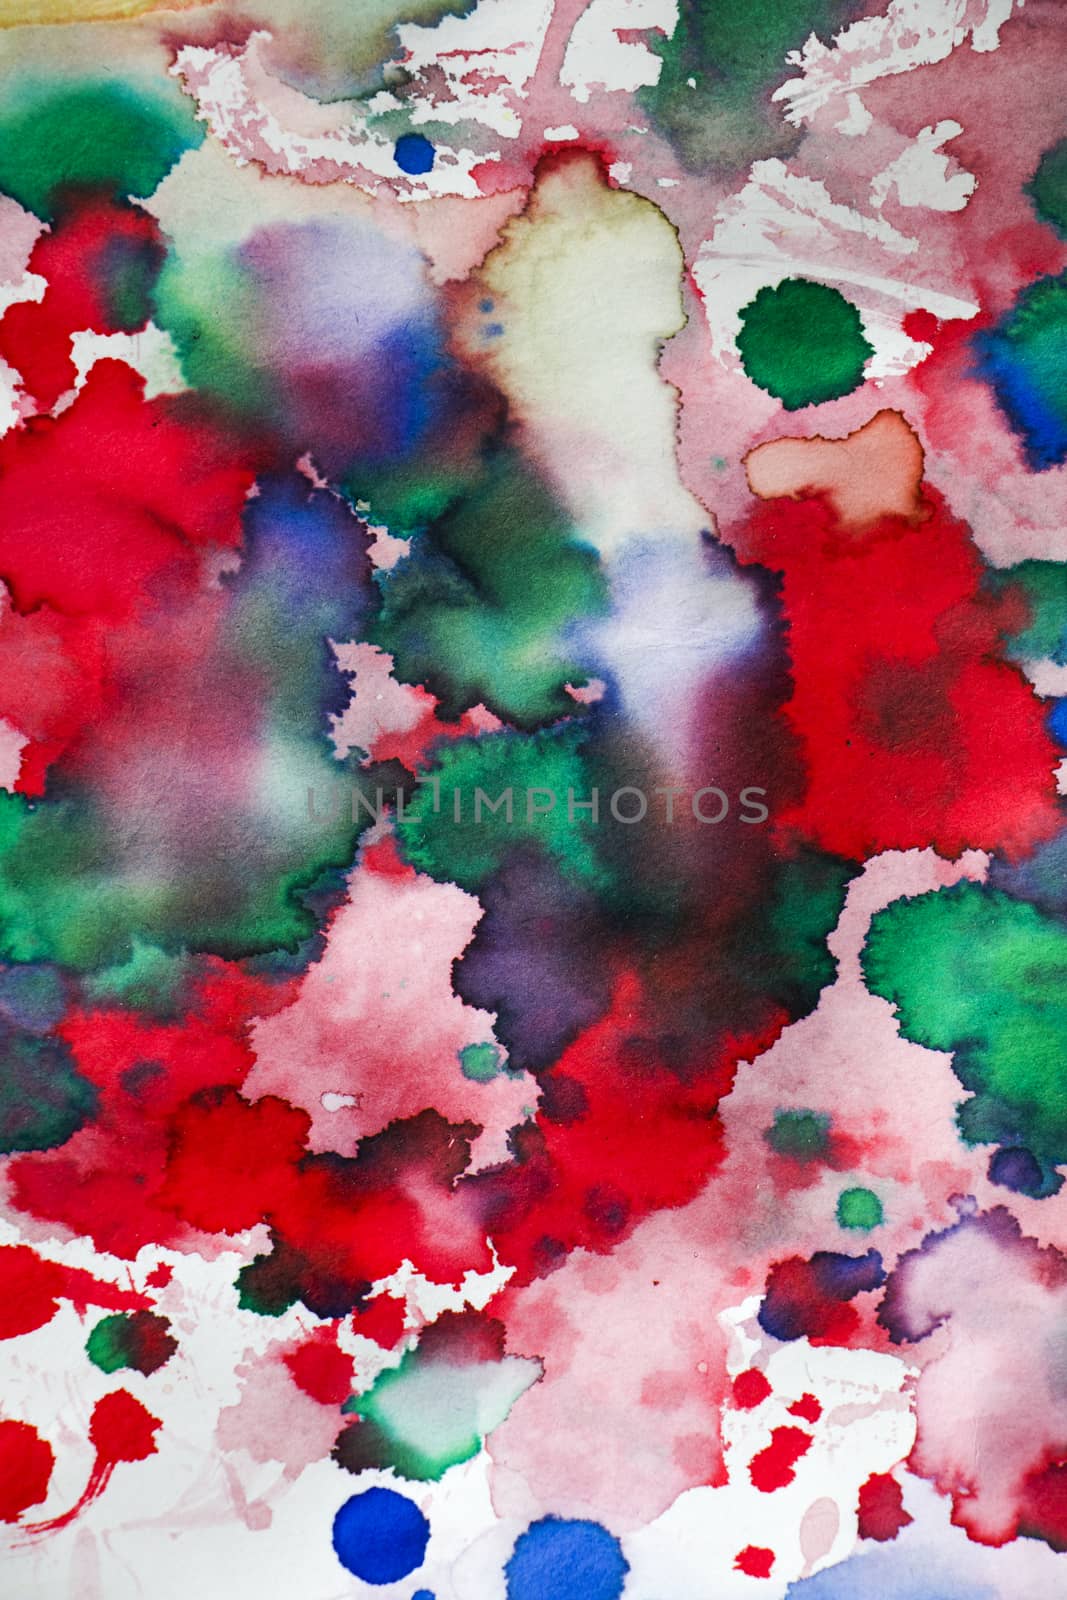 Ink drops on the paper, red, green and blue ink splashes background by Taidundua